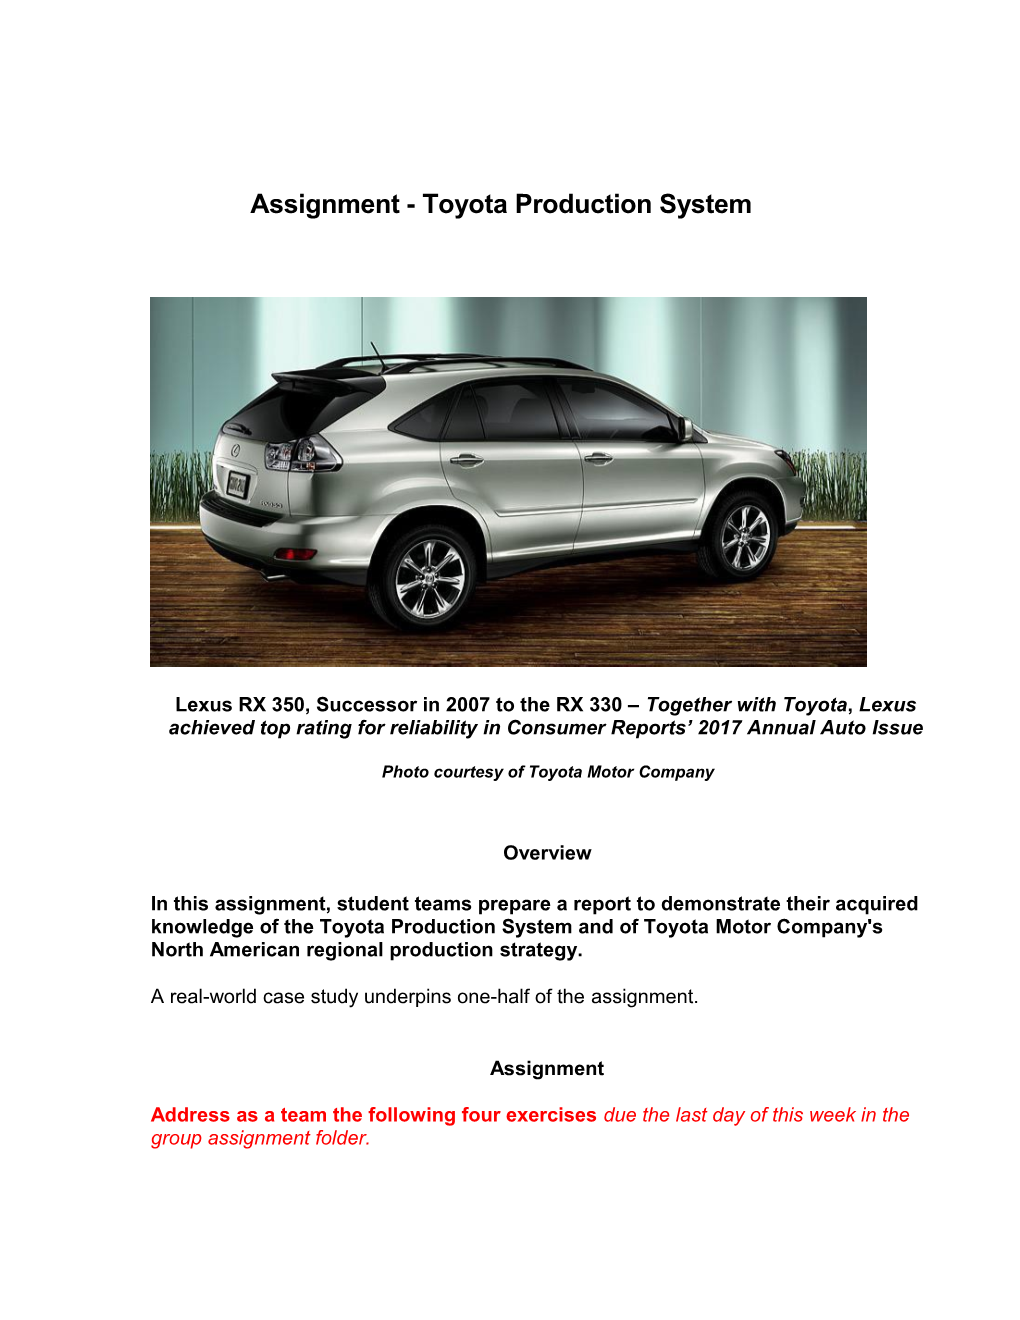 Assignment - Toyota Production System